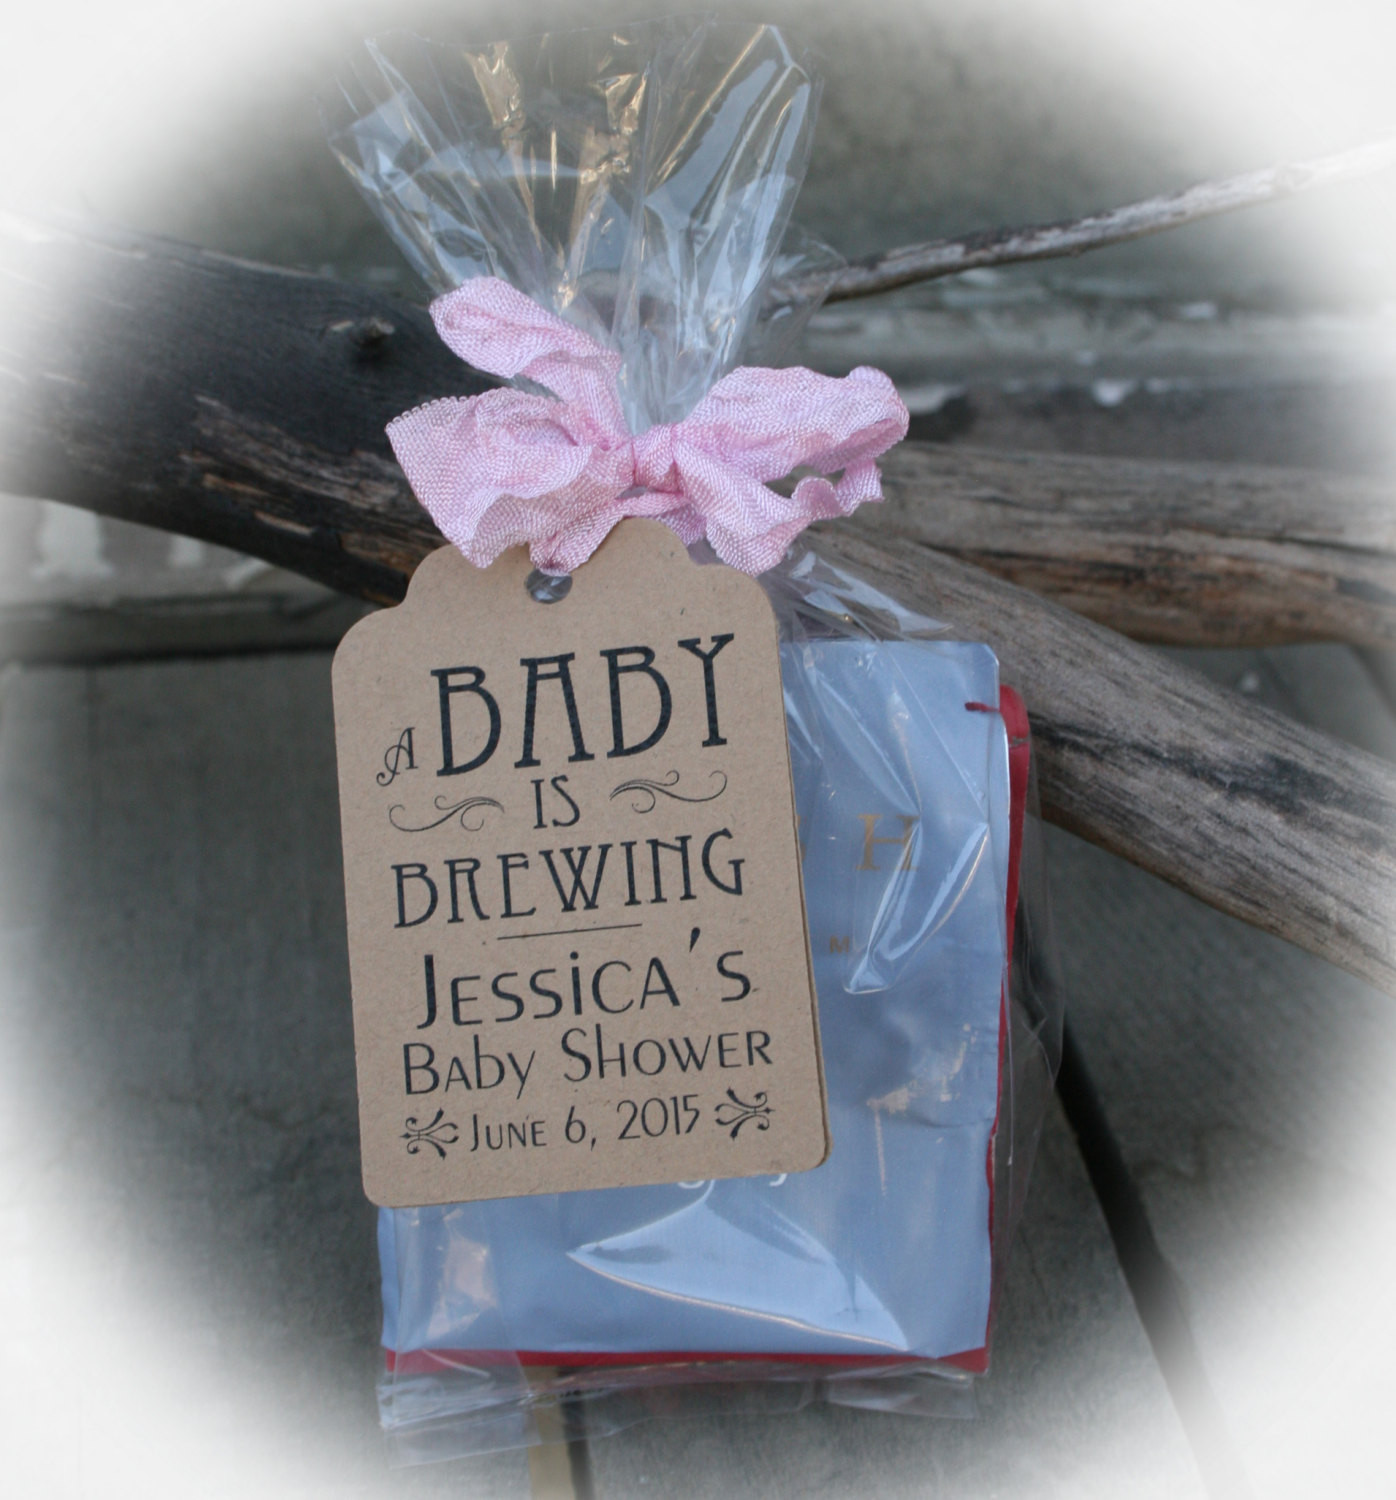 DIY Baby Shower Favor
 A BABY is Brewing Baby Shower Favors DIY Bags Favor Tags